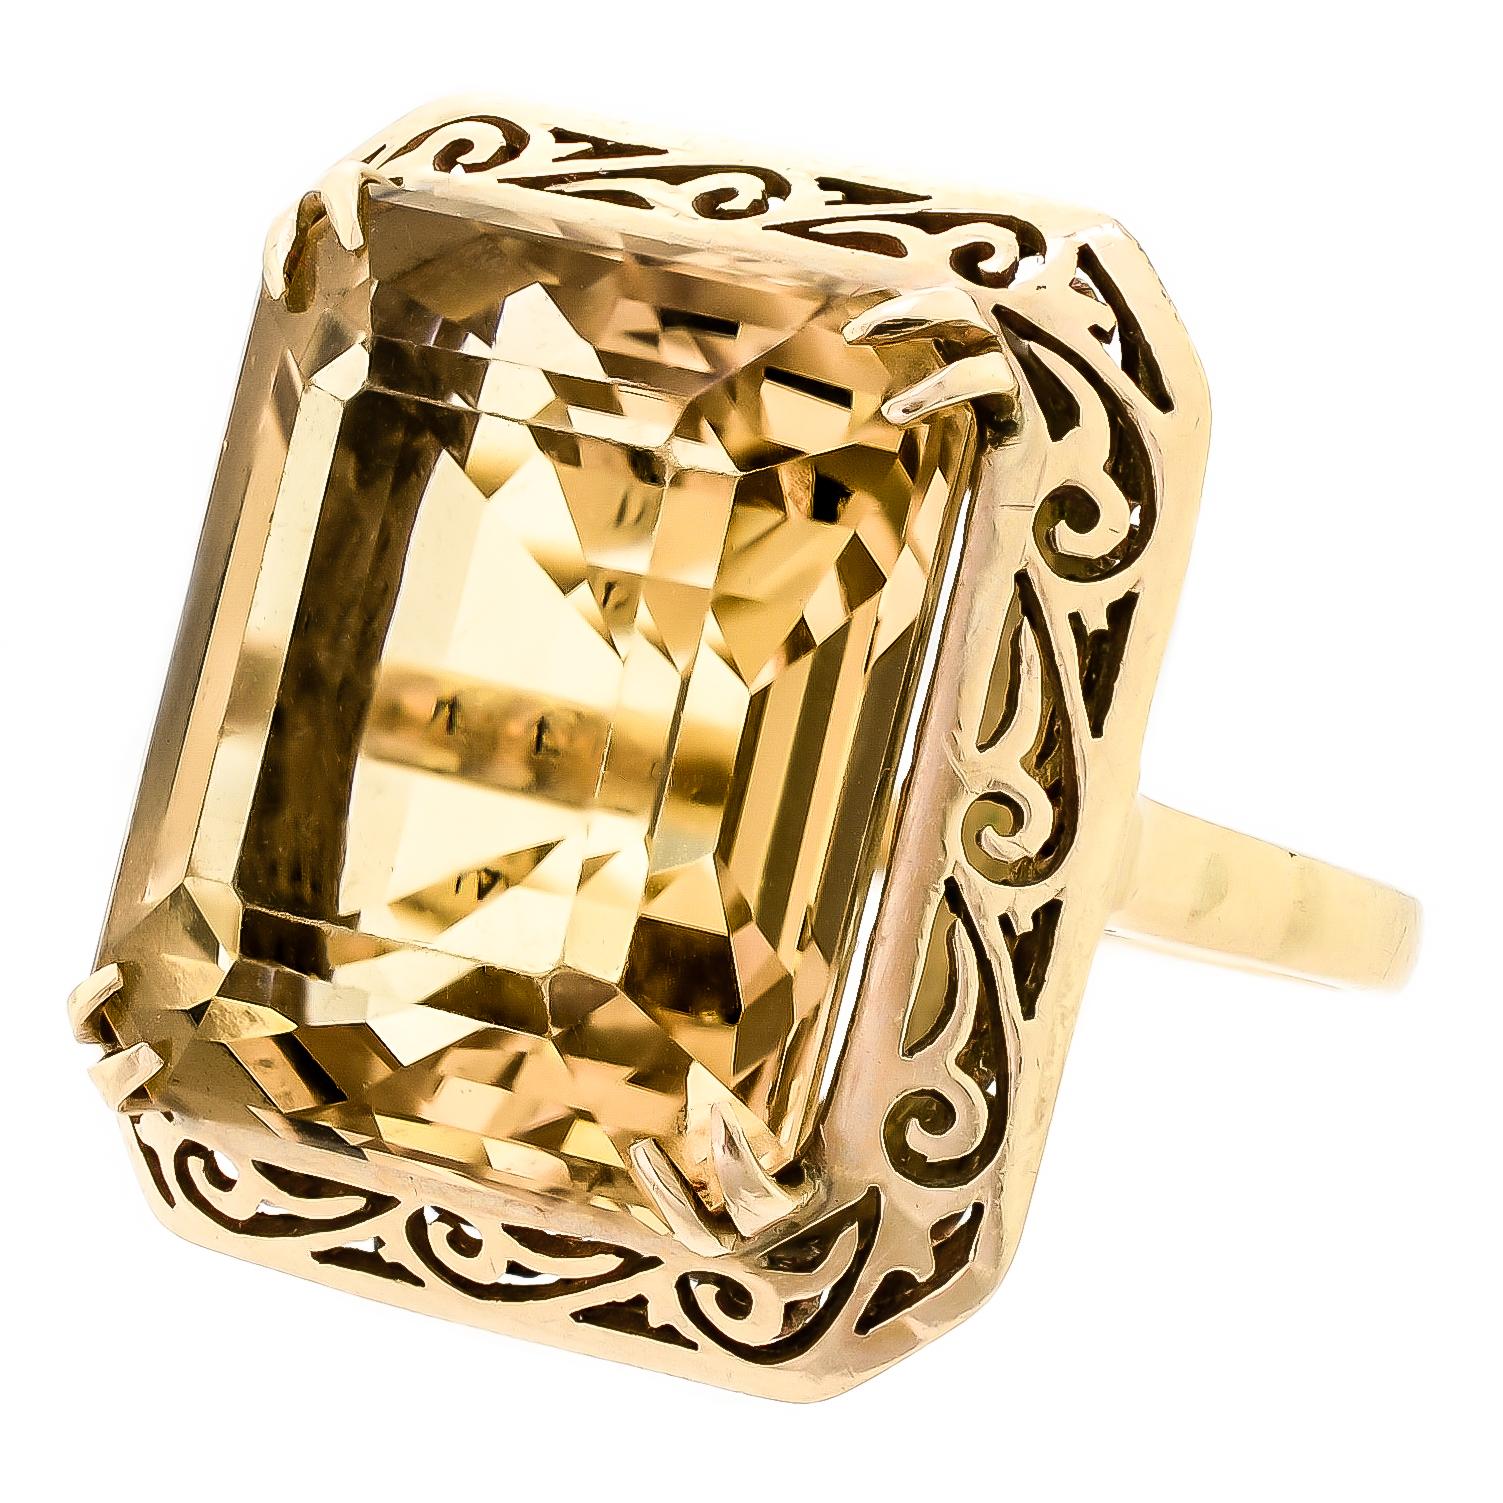 An elaborately designed 14 karat yellow gold mount is the home to one impressive golden yellow square step-cut citrine that glistens and glows from within. Handsomely tailored this big, and bold citrine and yellow gold ring exude luster with one